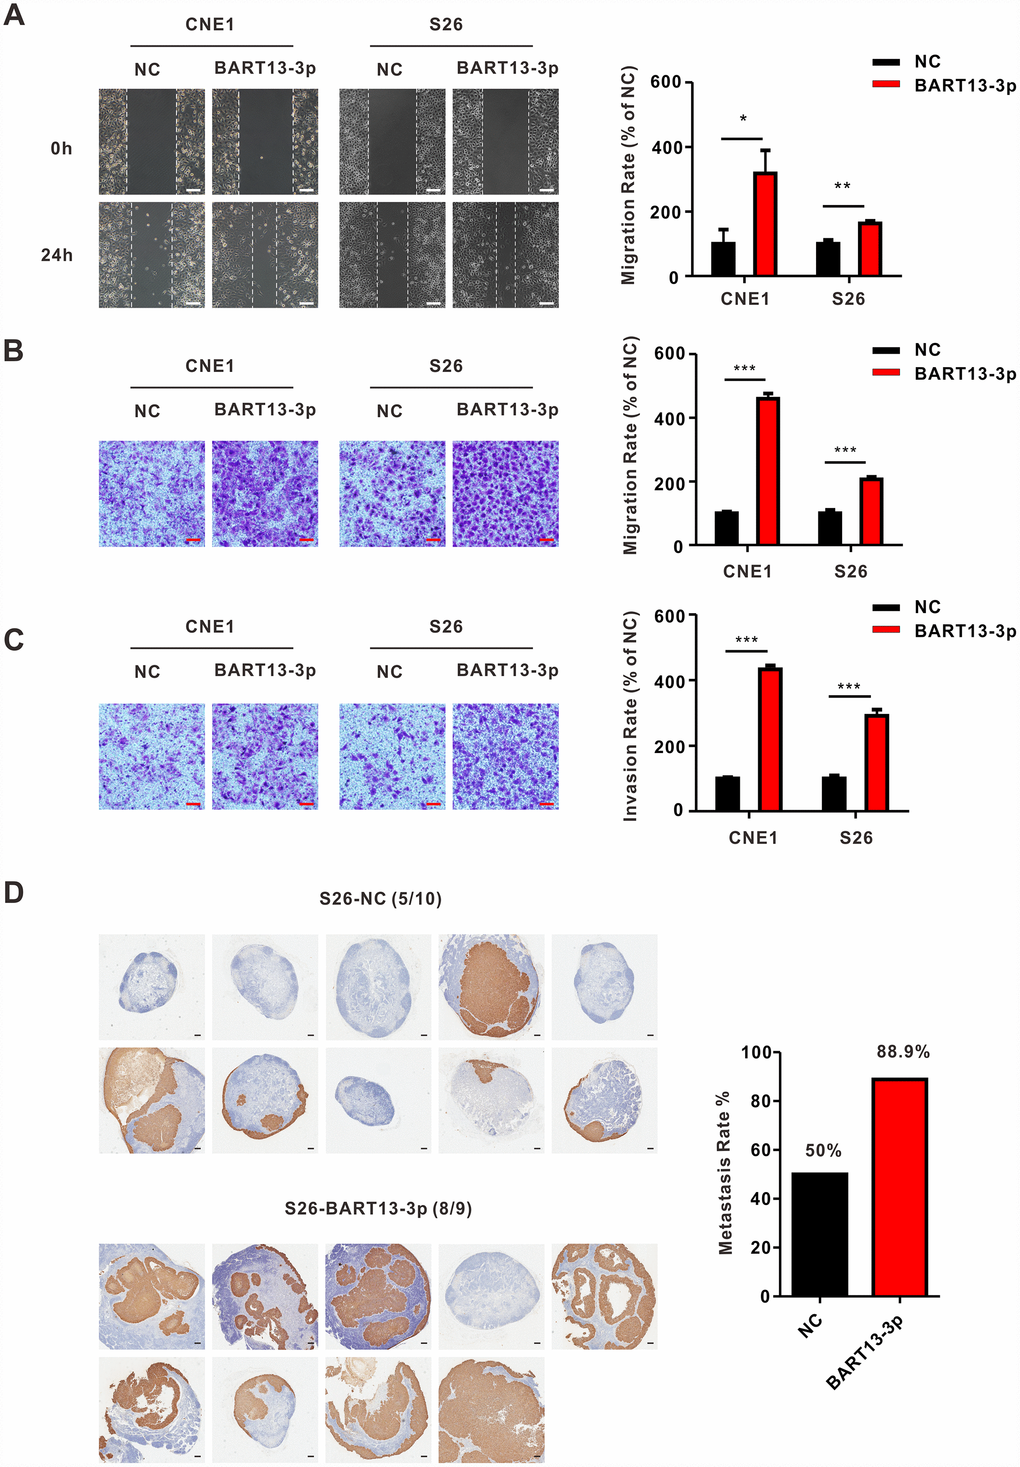 EBV-miR-BART13-3p promotes migration and invasion of NPC cells in vitro and causes enhanced metastasis of NPC cells in vivo. (A) Wound healing assay. Left panel: cell migration is measured by wound healing assay. CNE1 and S26 cells with BART13-3p overexpressed show higher migration capacity than negative control cells. Right panel: quantification of migration rate of CNE1 and S26 cells. Scale bar, 100μm. (B) Transwell migration assay. Left panel: up-regulated level of BART13-3p leads to increased migration of NPC cells using transwell assay without matrigel. Right panel: quantification of migration rate of NPC cells. Scale bar, 100μm. (C) Transwell invasion assay. Left panel: BART13-3p overexpression increases NPC cell invasion using transwell assay with matrigel. Right panel: quantification of invasion rate of NPC cells. Scale bar, 100μm. Error bars represent SEM. (D) S26-NC cells or S26-BART13-3p cells were inoculated under the right foot pads of the mice (n=8-10 per group). Popliteal lymph node metastasis on the same side were marked with immunohistochemical staining of pan-keratin. Scale bar, 200μm. (*P